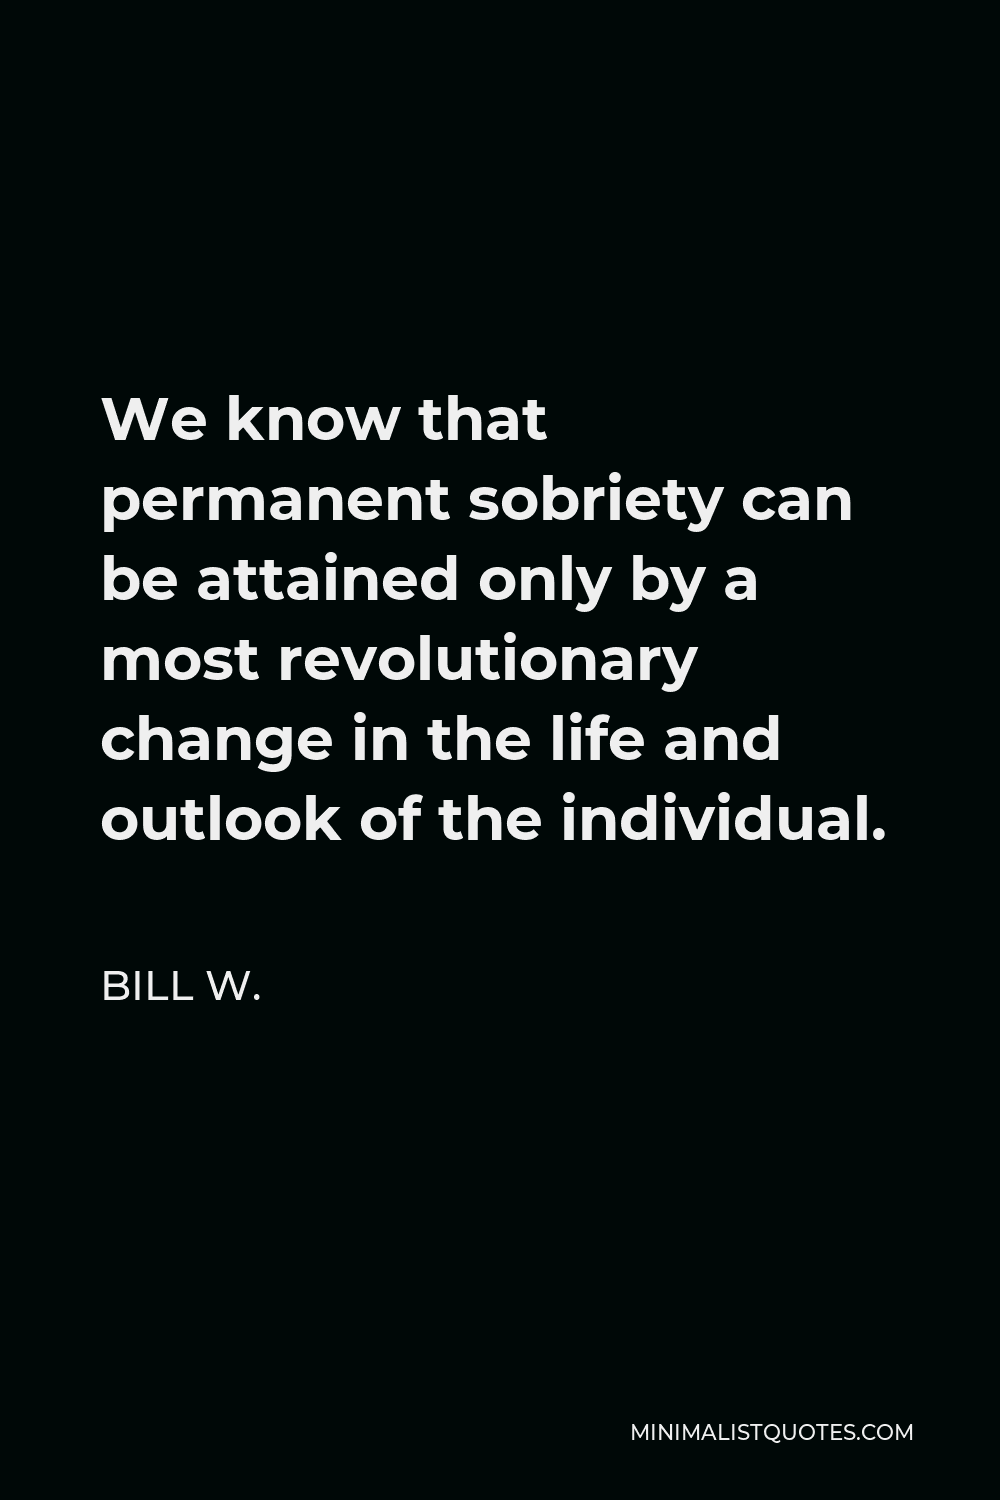 Bill W. Quote - We know that permanent sobriety can be attained only by a most revolutionary change in the life and outlook of the individual.